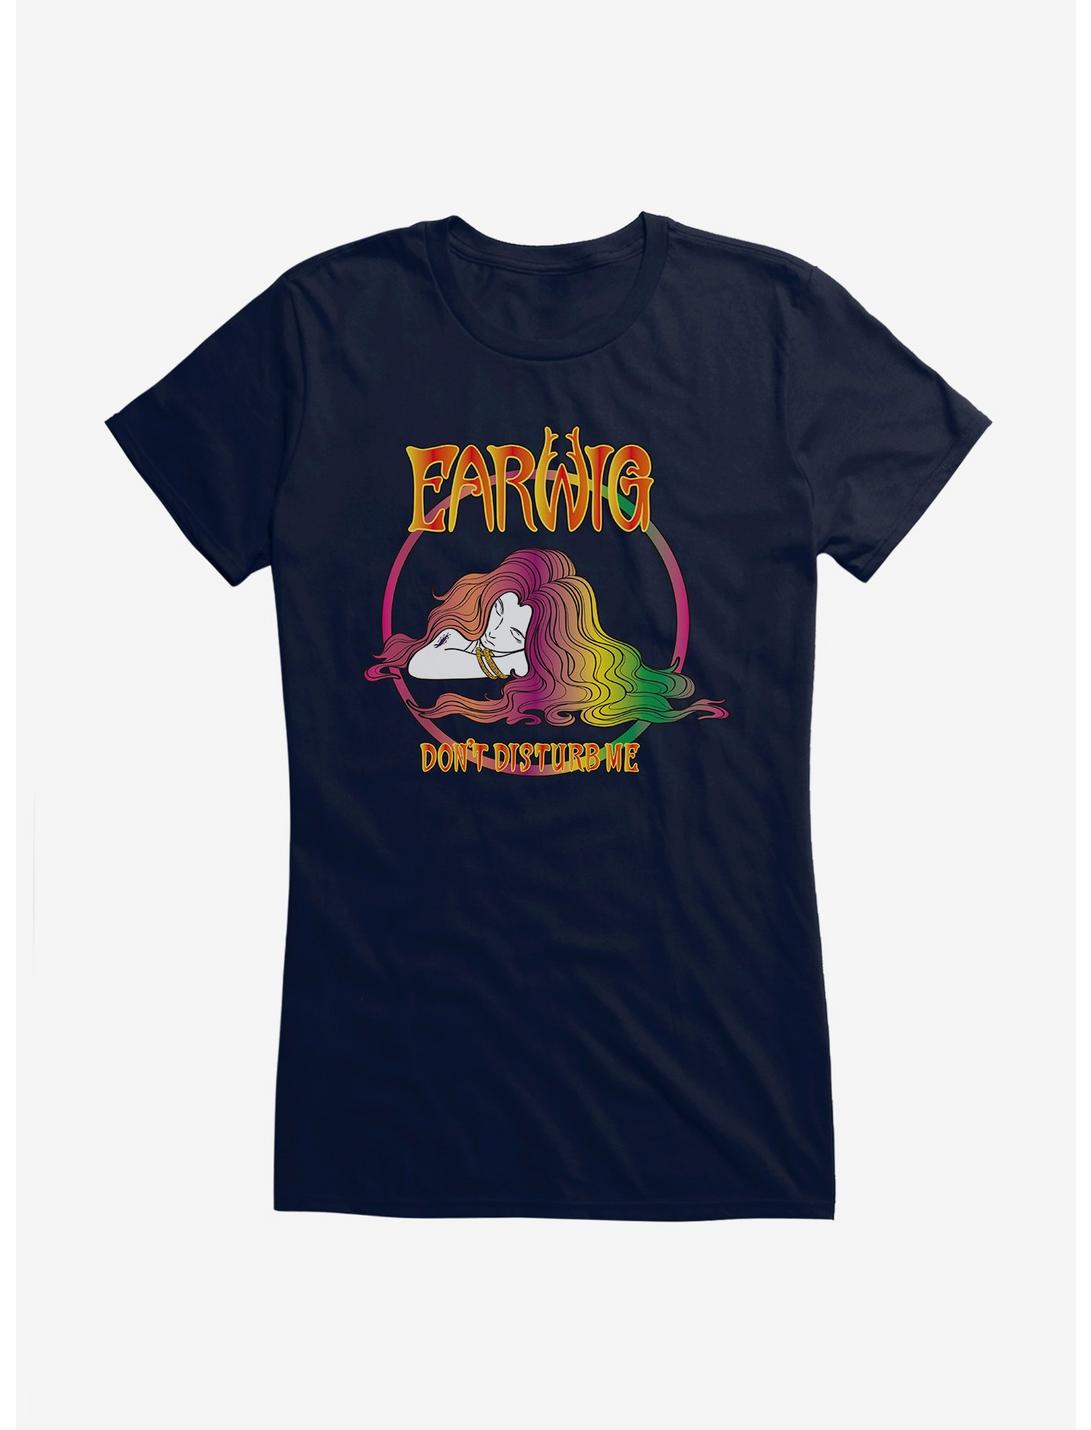 Studio Ghibli Earwig And The Witch Don't Disturb Me Girls T-Shirt, NAVY, hi-res